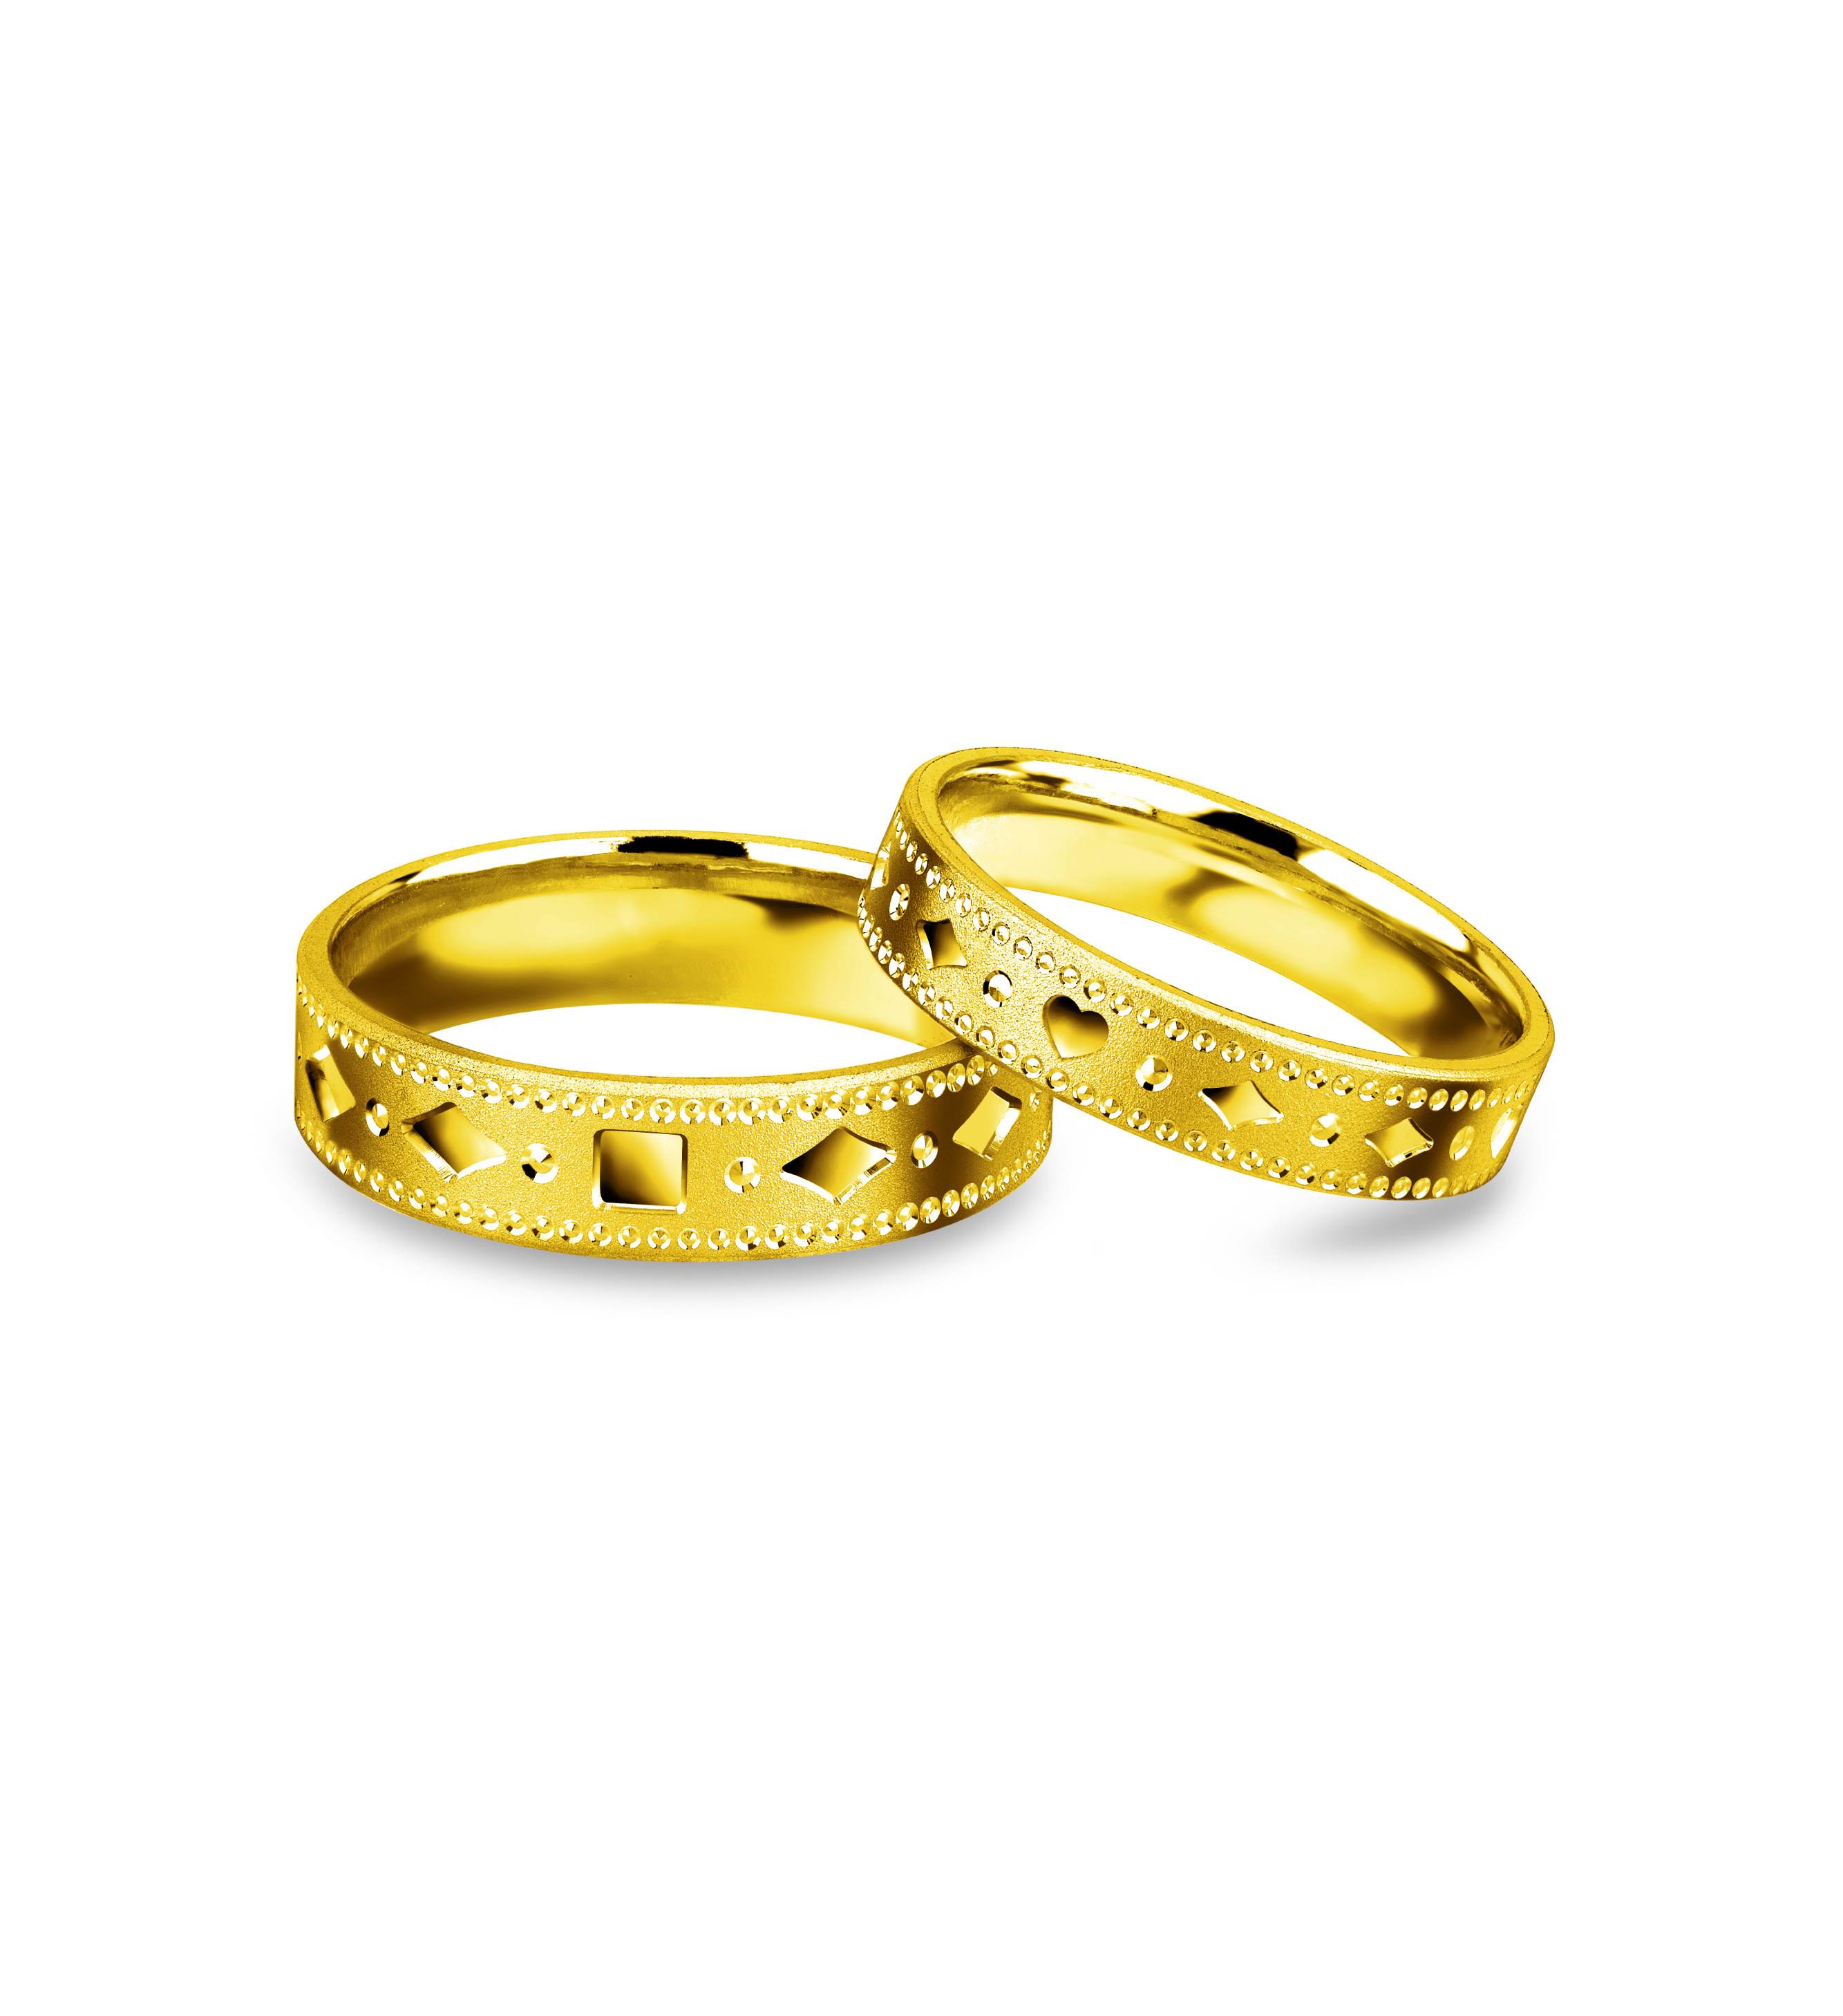 Beloved Collection "Romantic Memory" Gold Pair Rings